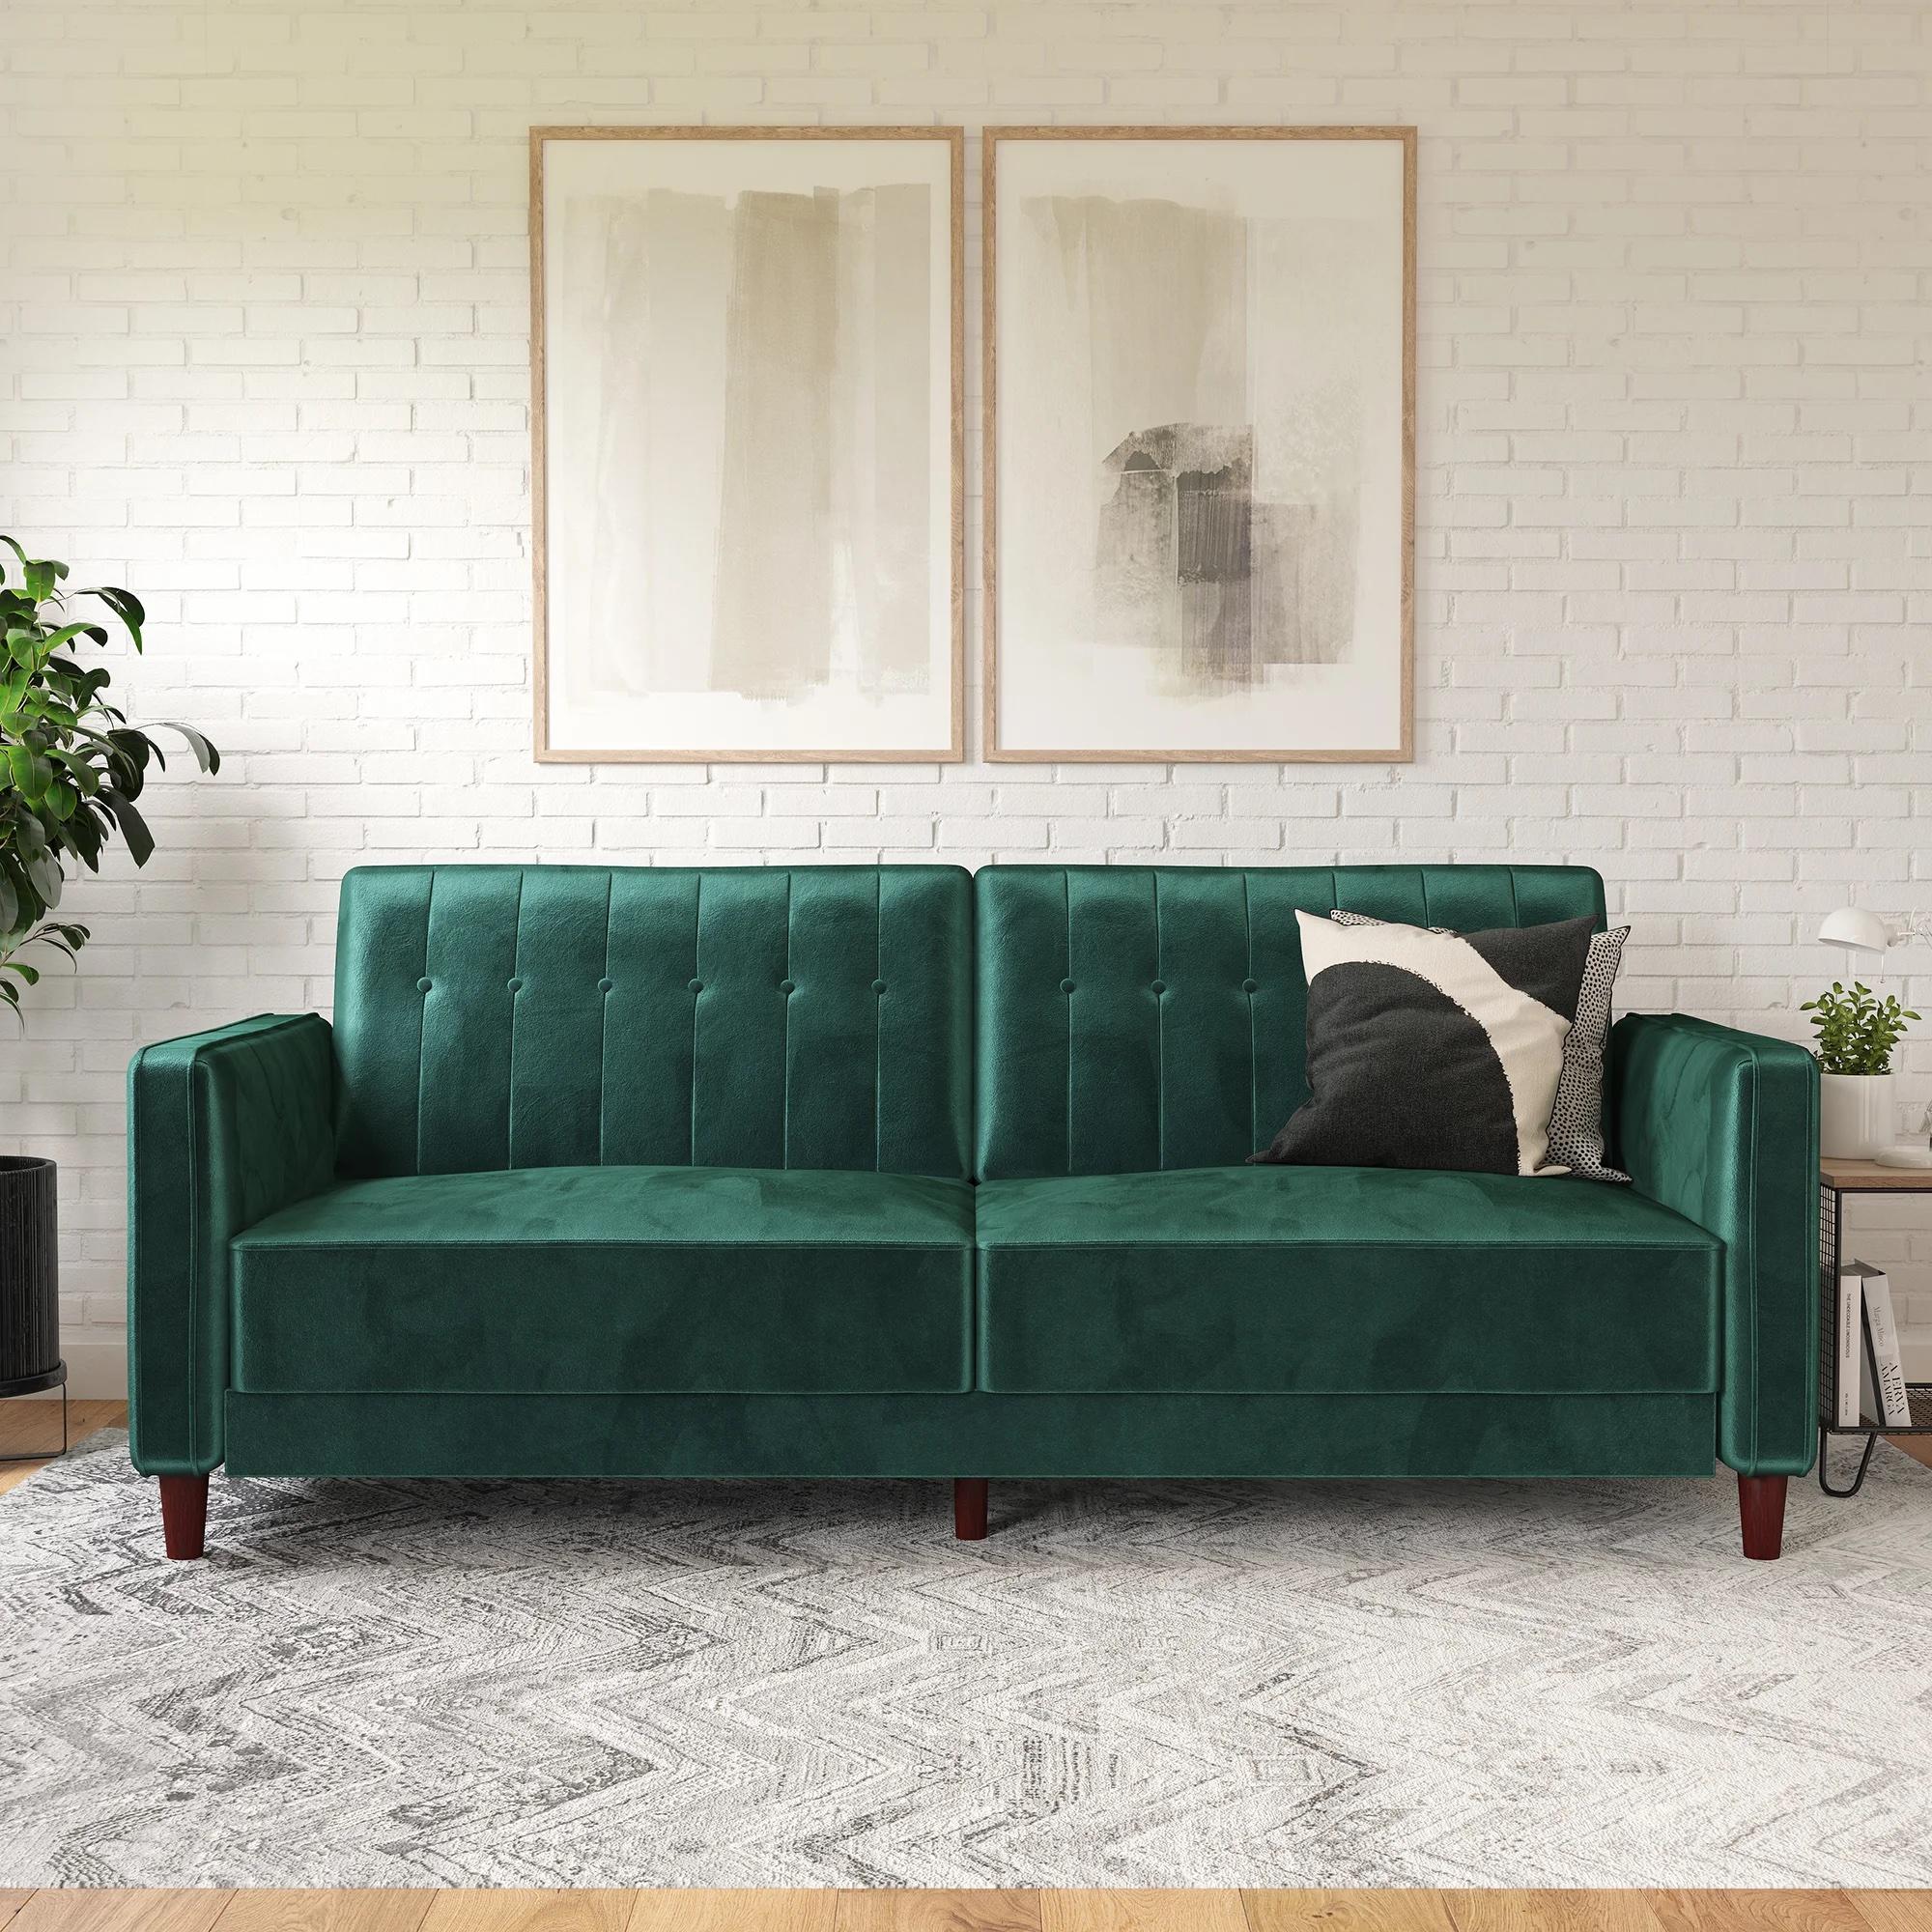 Living Room Sets Are On At Wayfair